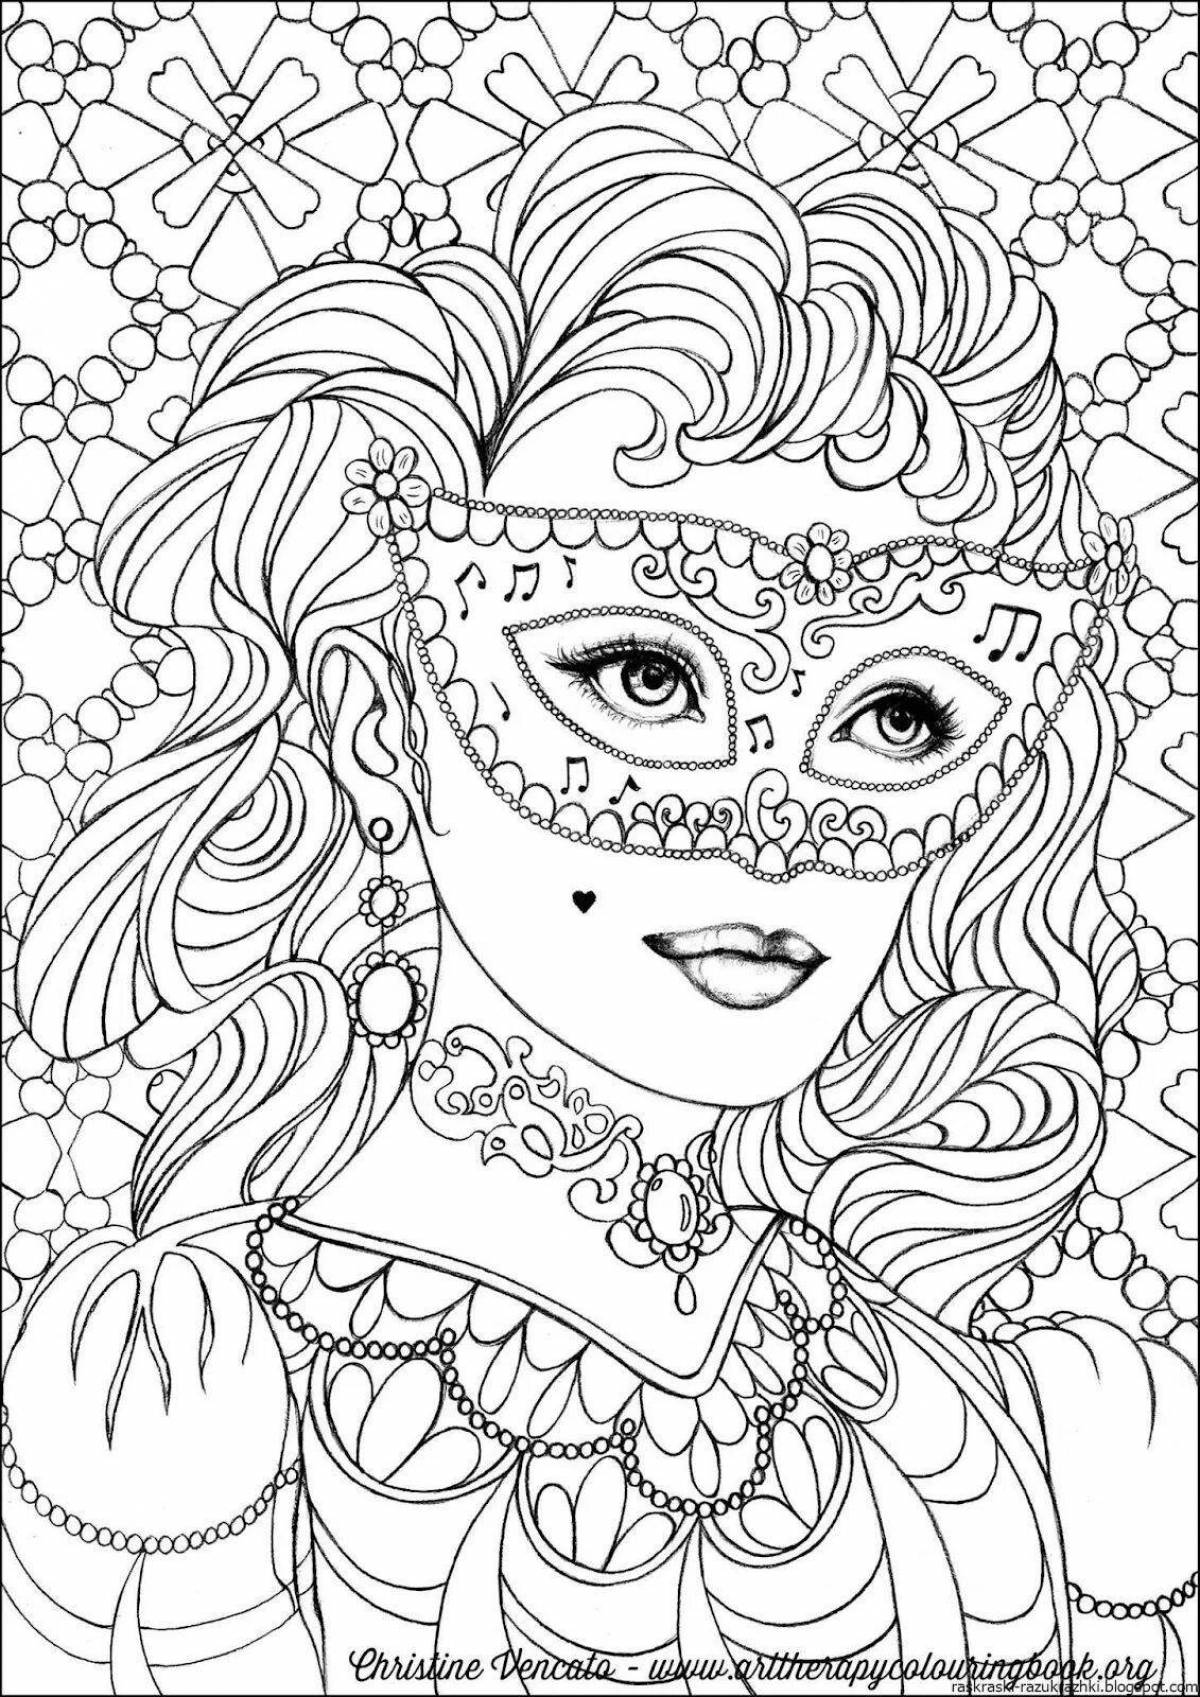 Glowing coloring pages of beautiful girls